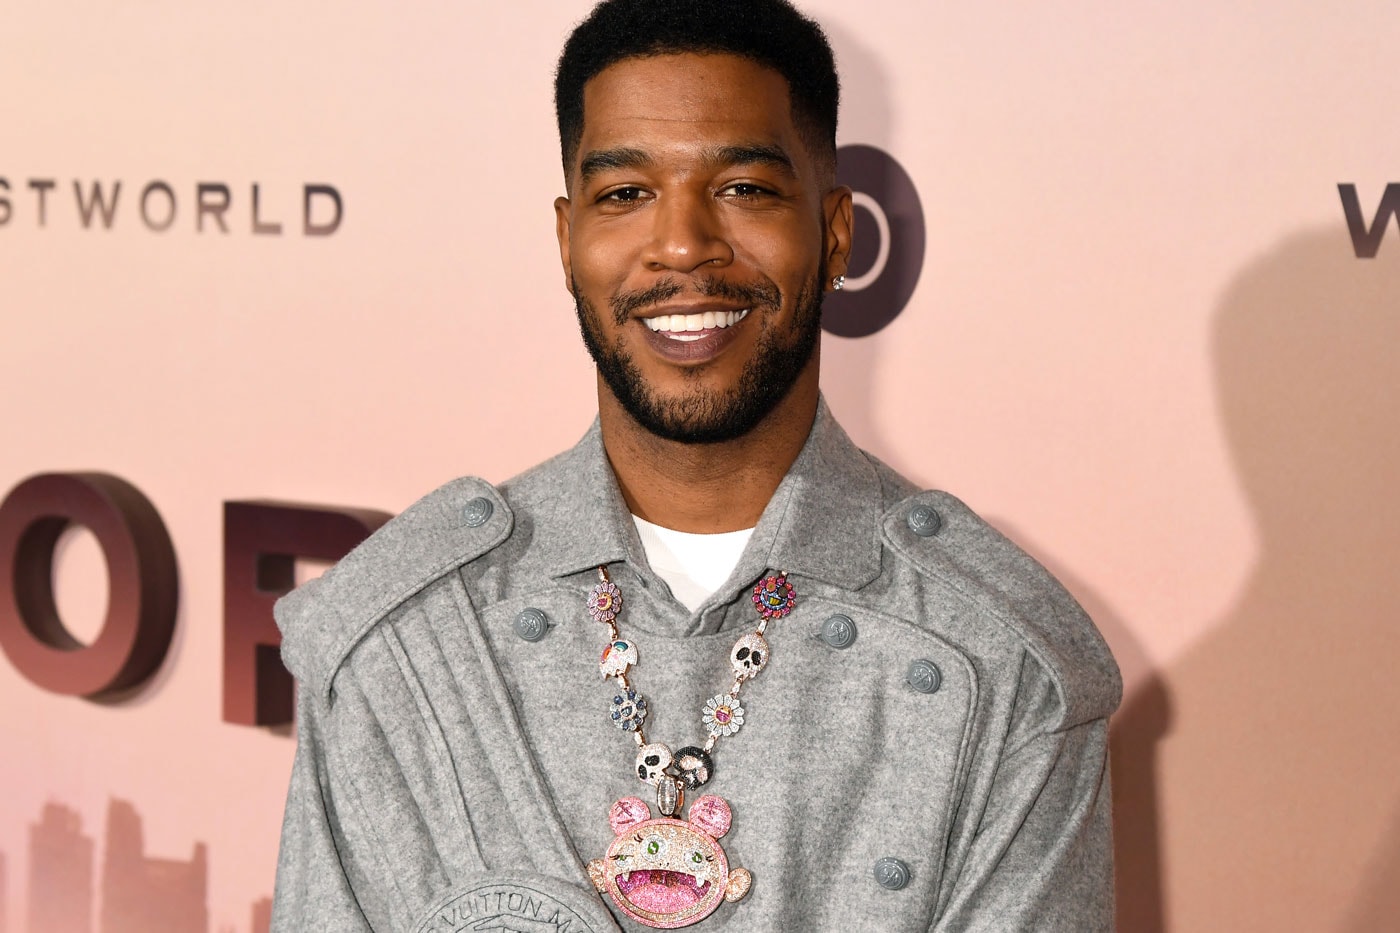 Revisit Kid Cudi's Most Important Moments in Music